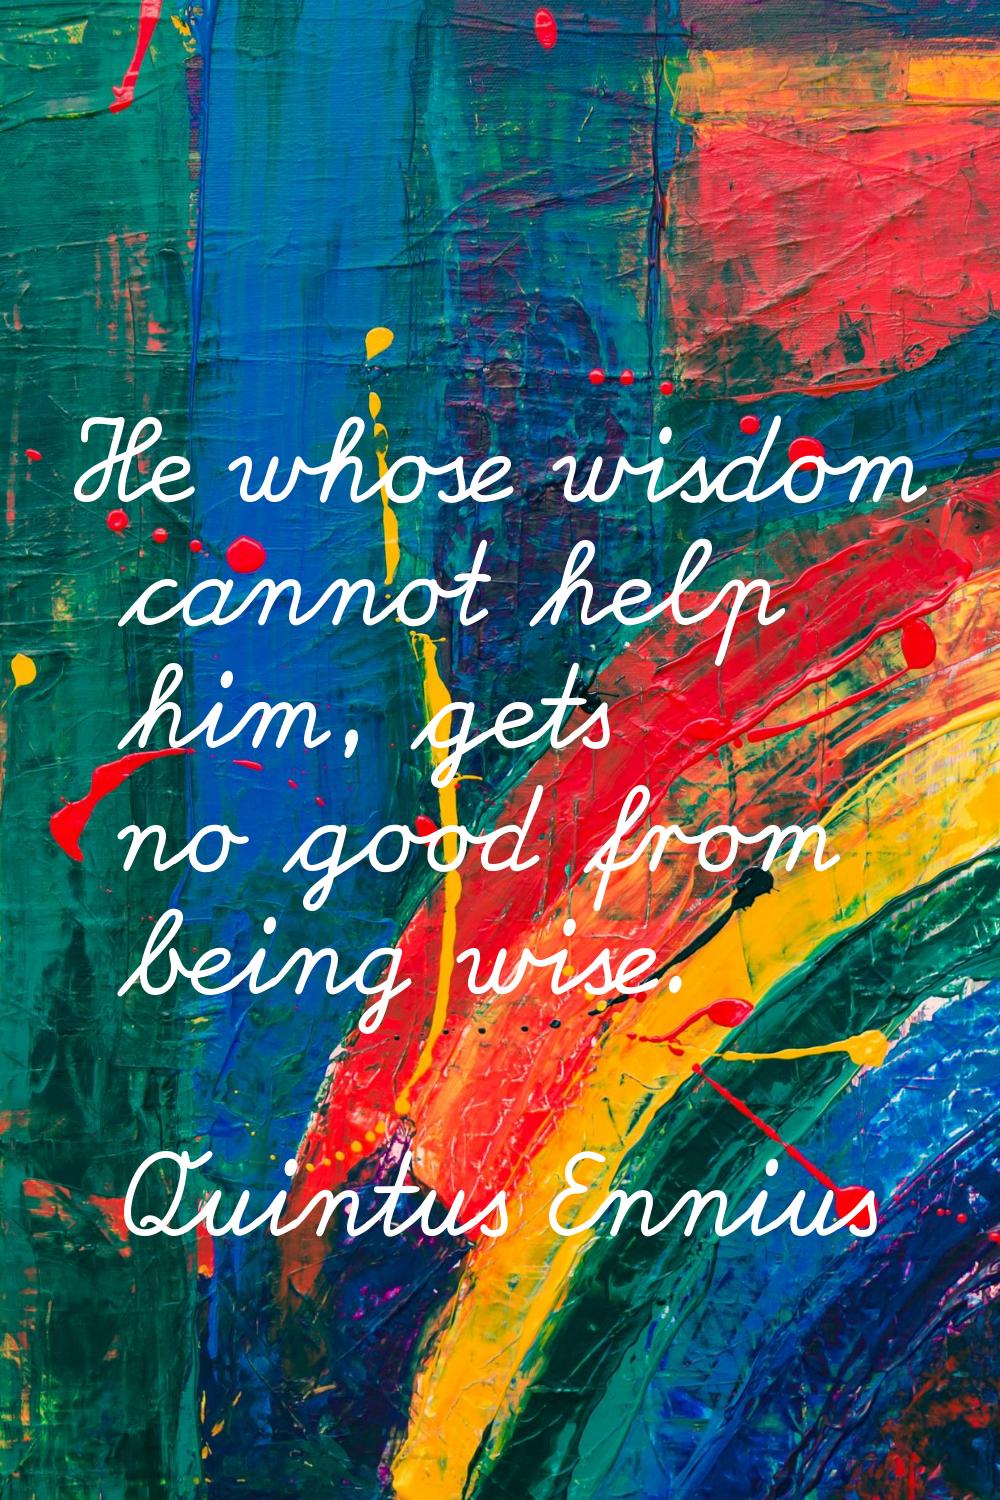 He whose wisdom cannot help him, gets no good from being wise.